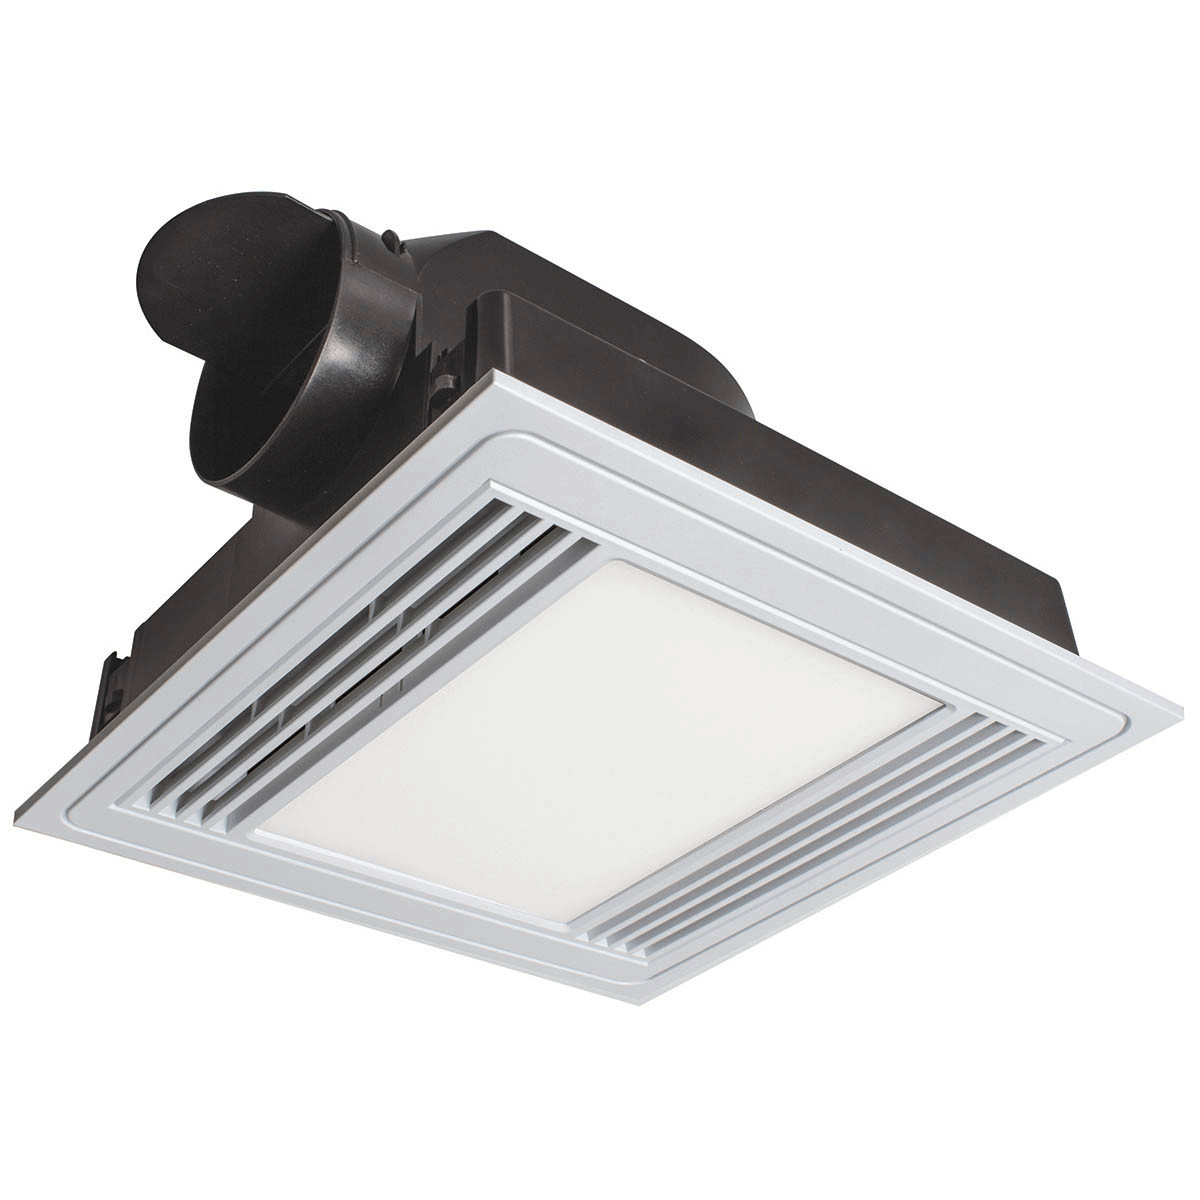 Bathroom Exhaust With Light
 Amazing Tips on How to Clean a Bathroom Exhaust Fan in 10